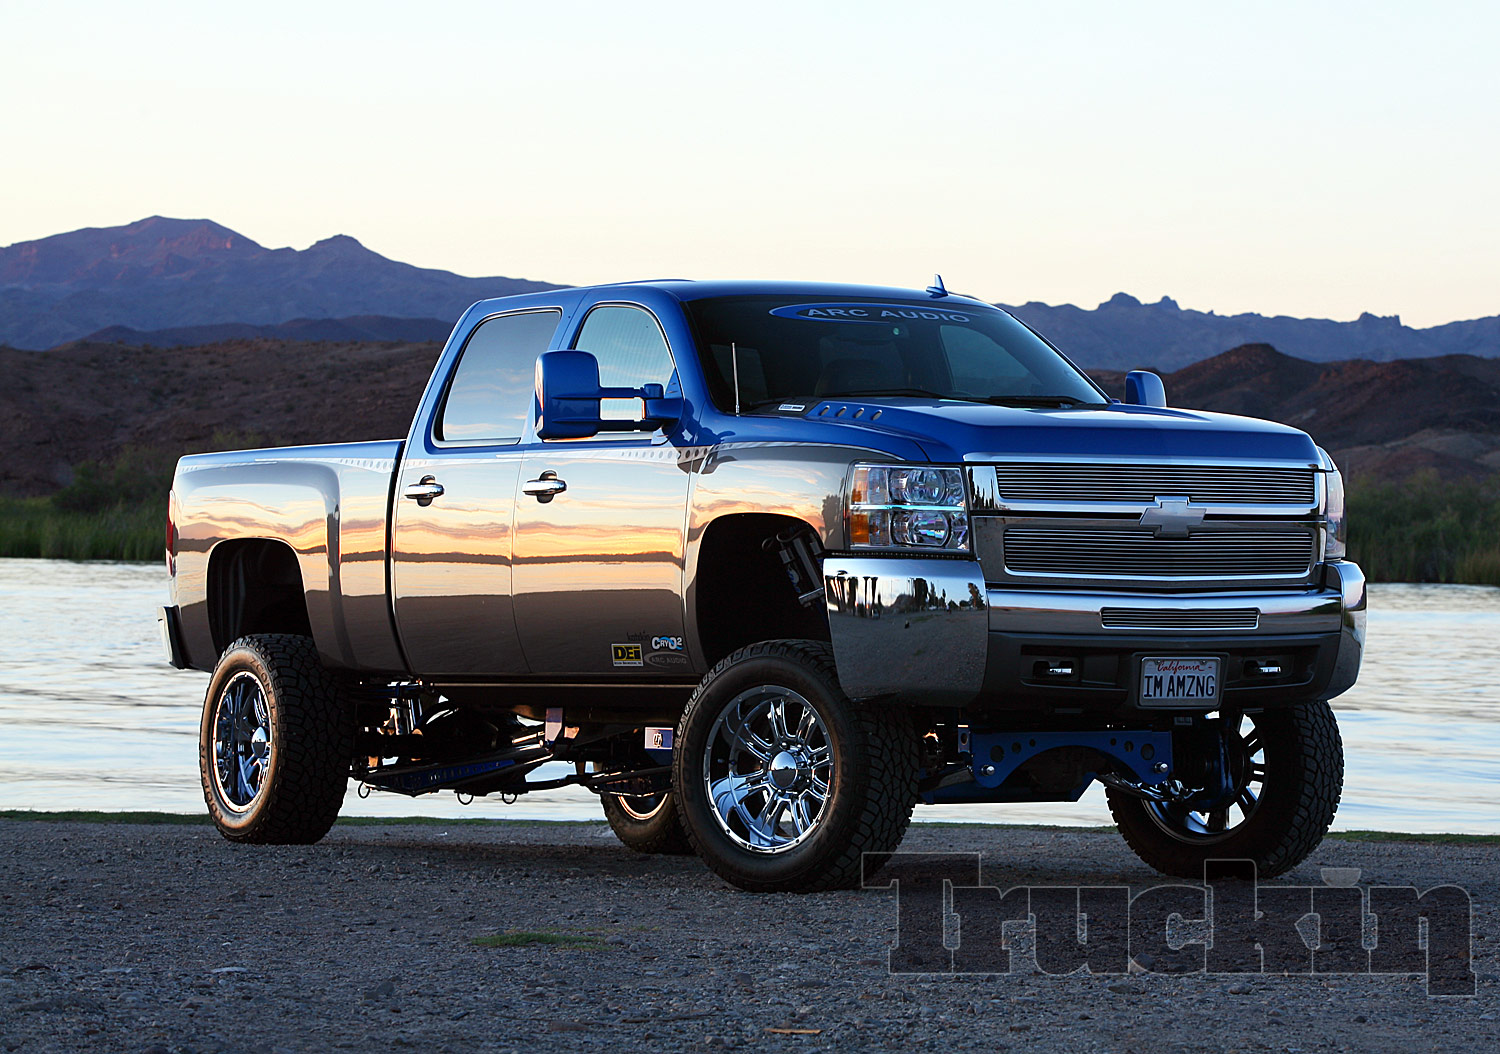 Free Download Chevy Diesel Truck Wallpaper Lifted Chevy Diesel Trucks 1500x1054 For Your Desktop Mobile Tablet Explore 49 Lifted Duramax Wallpaper Truck Wallpaper For My Desktop 4x4 Wallpapers Lifted